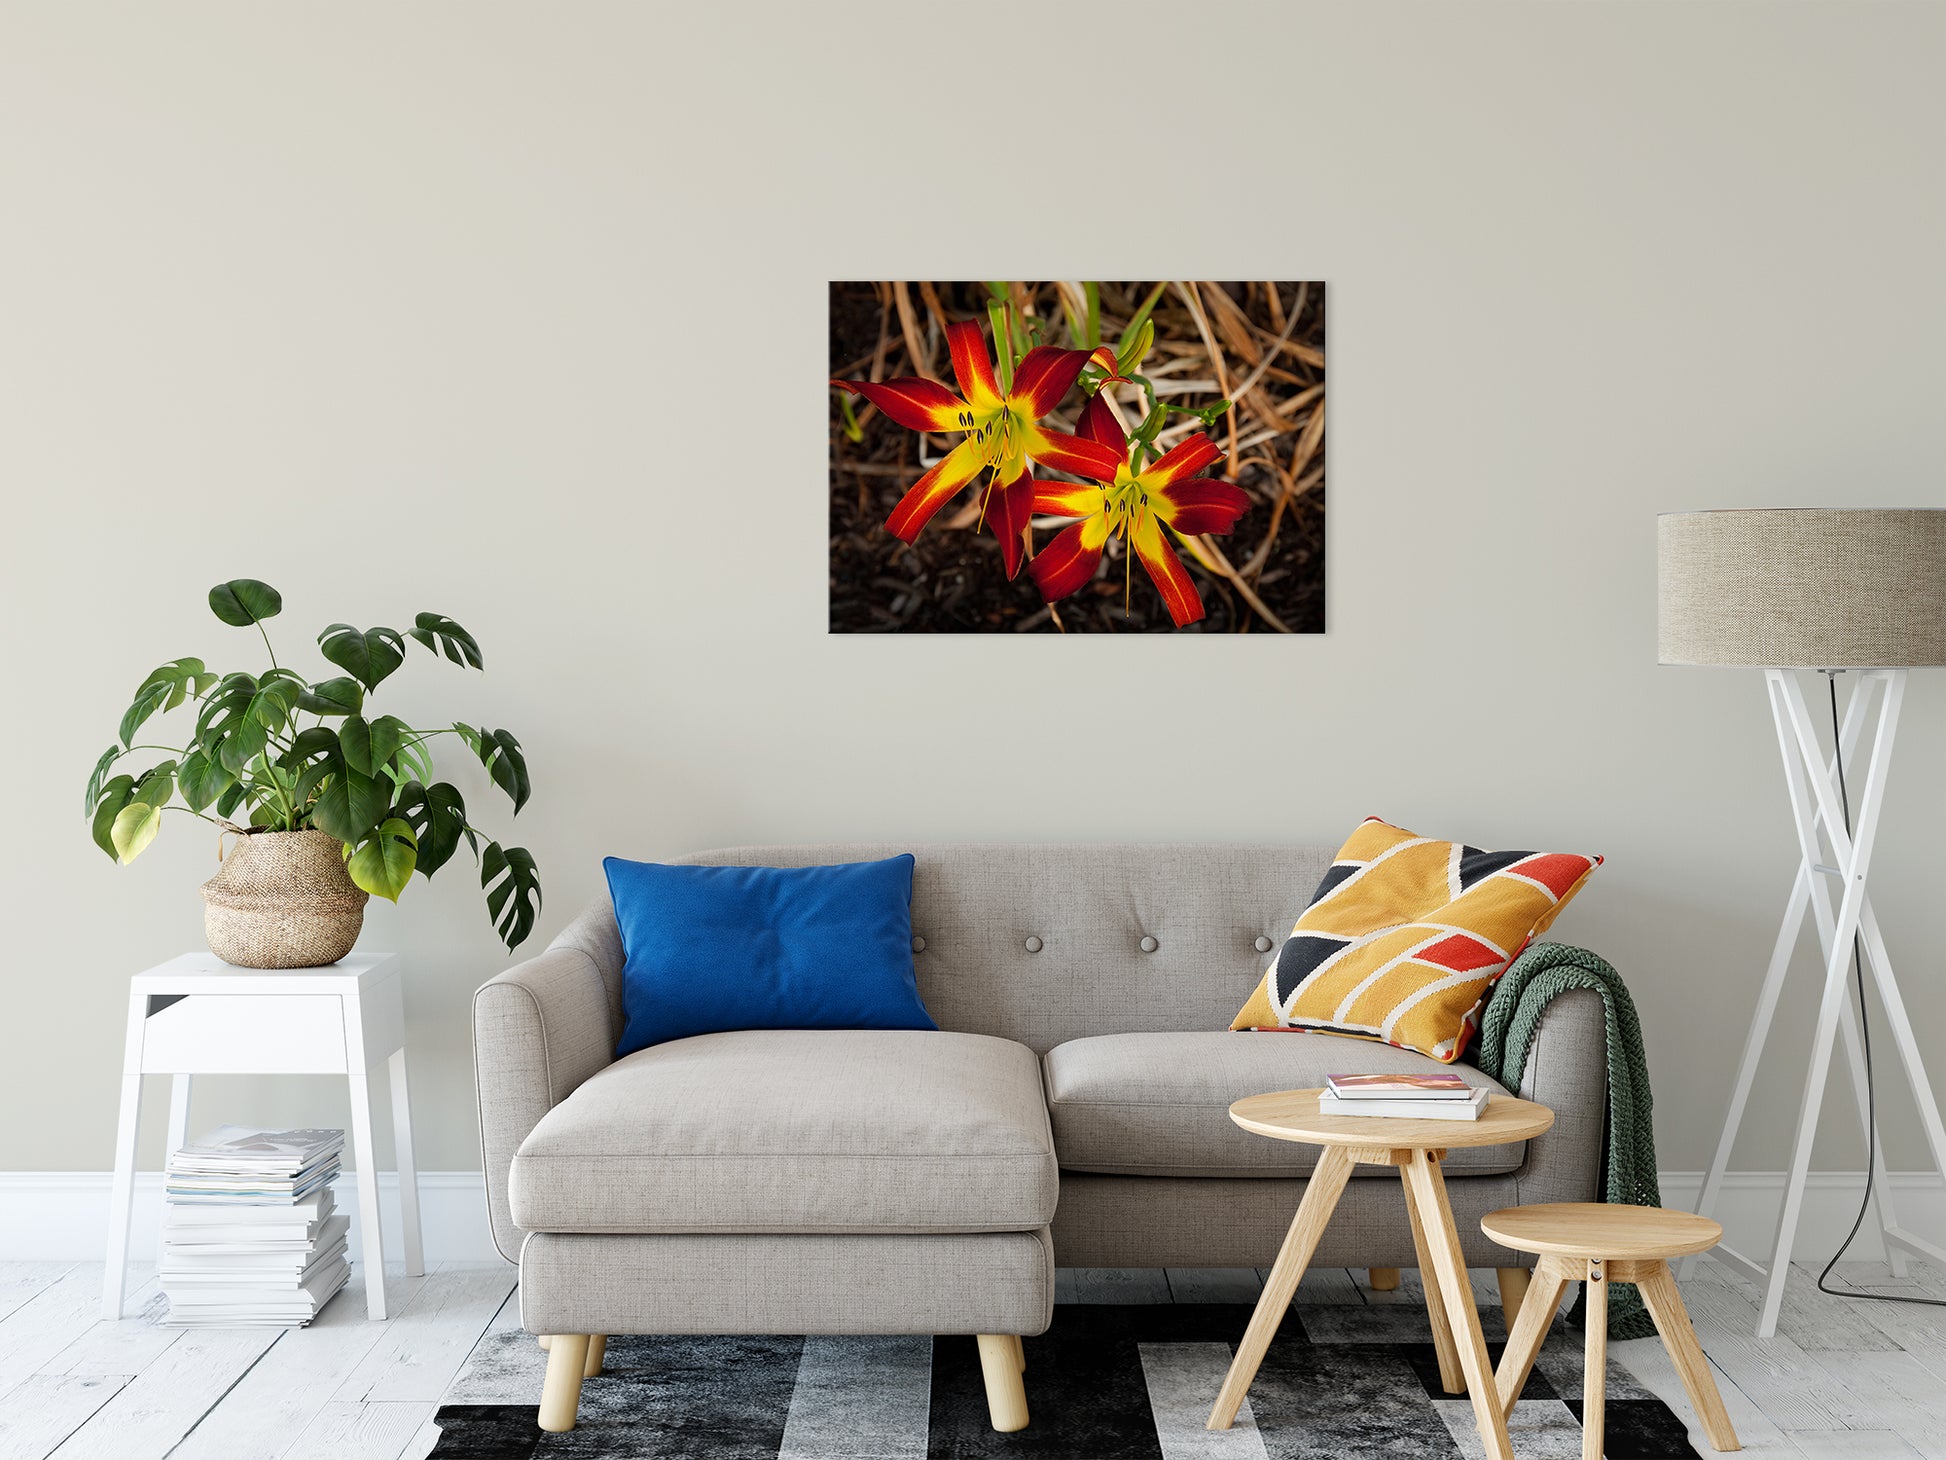 Royal Sunset Lily Nature / Floral Photo Fine Art Canvas Wall Art Prints 24" x 36" - PIPAFINEART